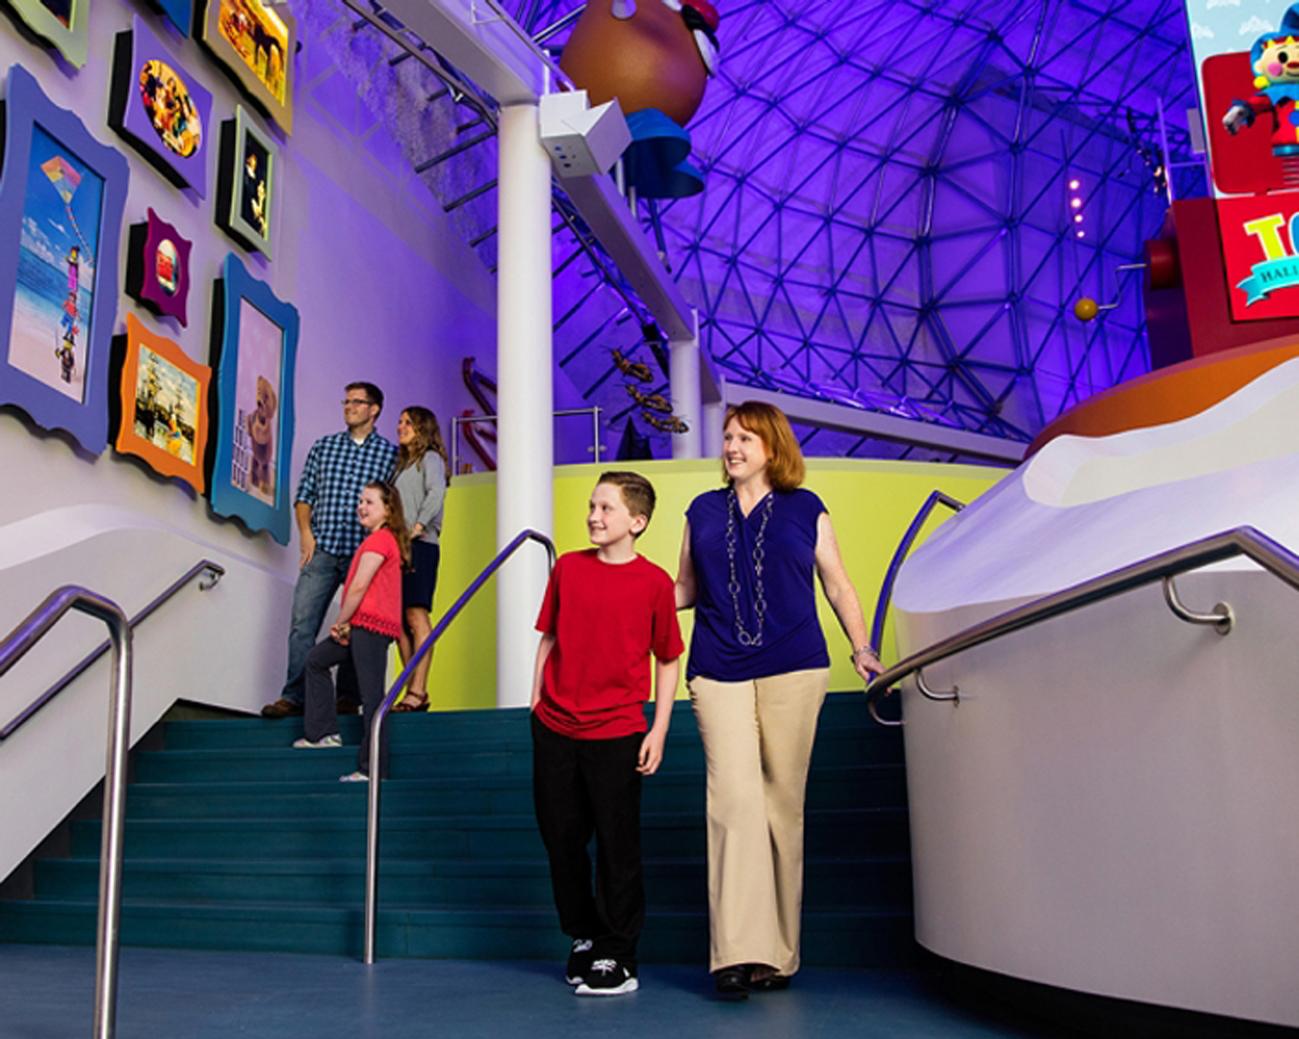 Gateway provides ticketing solutions for the attractions industry, its clients include The Strong National Museum of Play in New York (pictured)